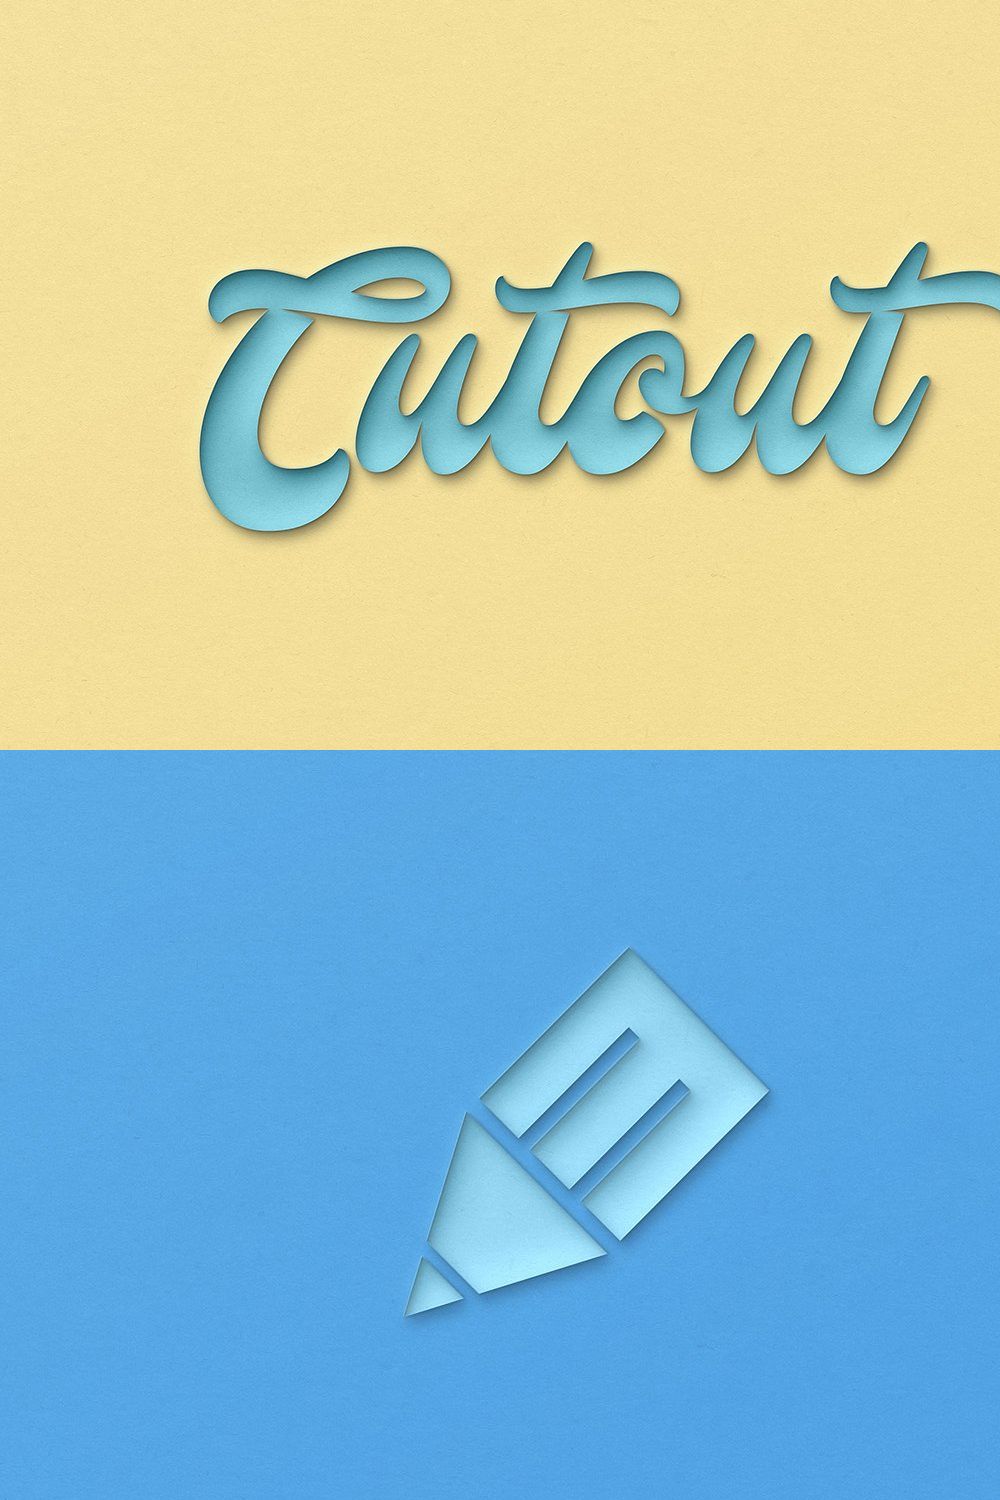 Cutout Effect for Photoshop pinterest preview image.